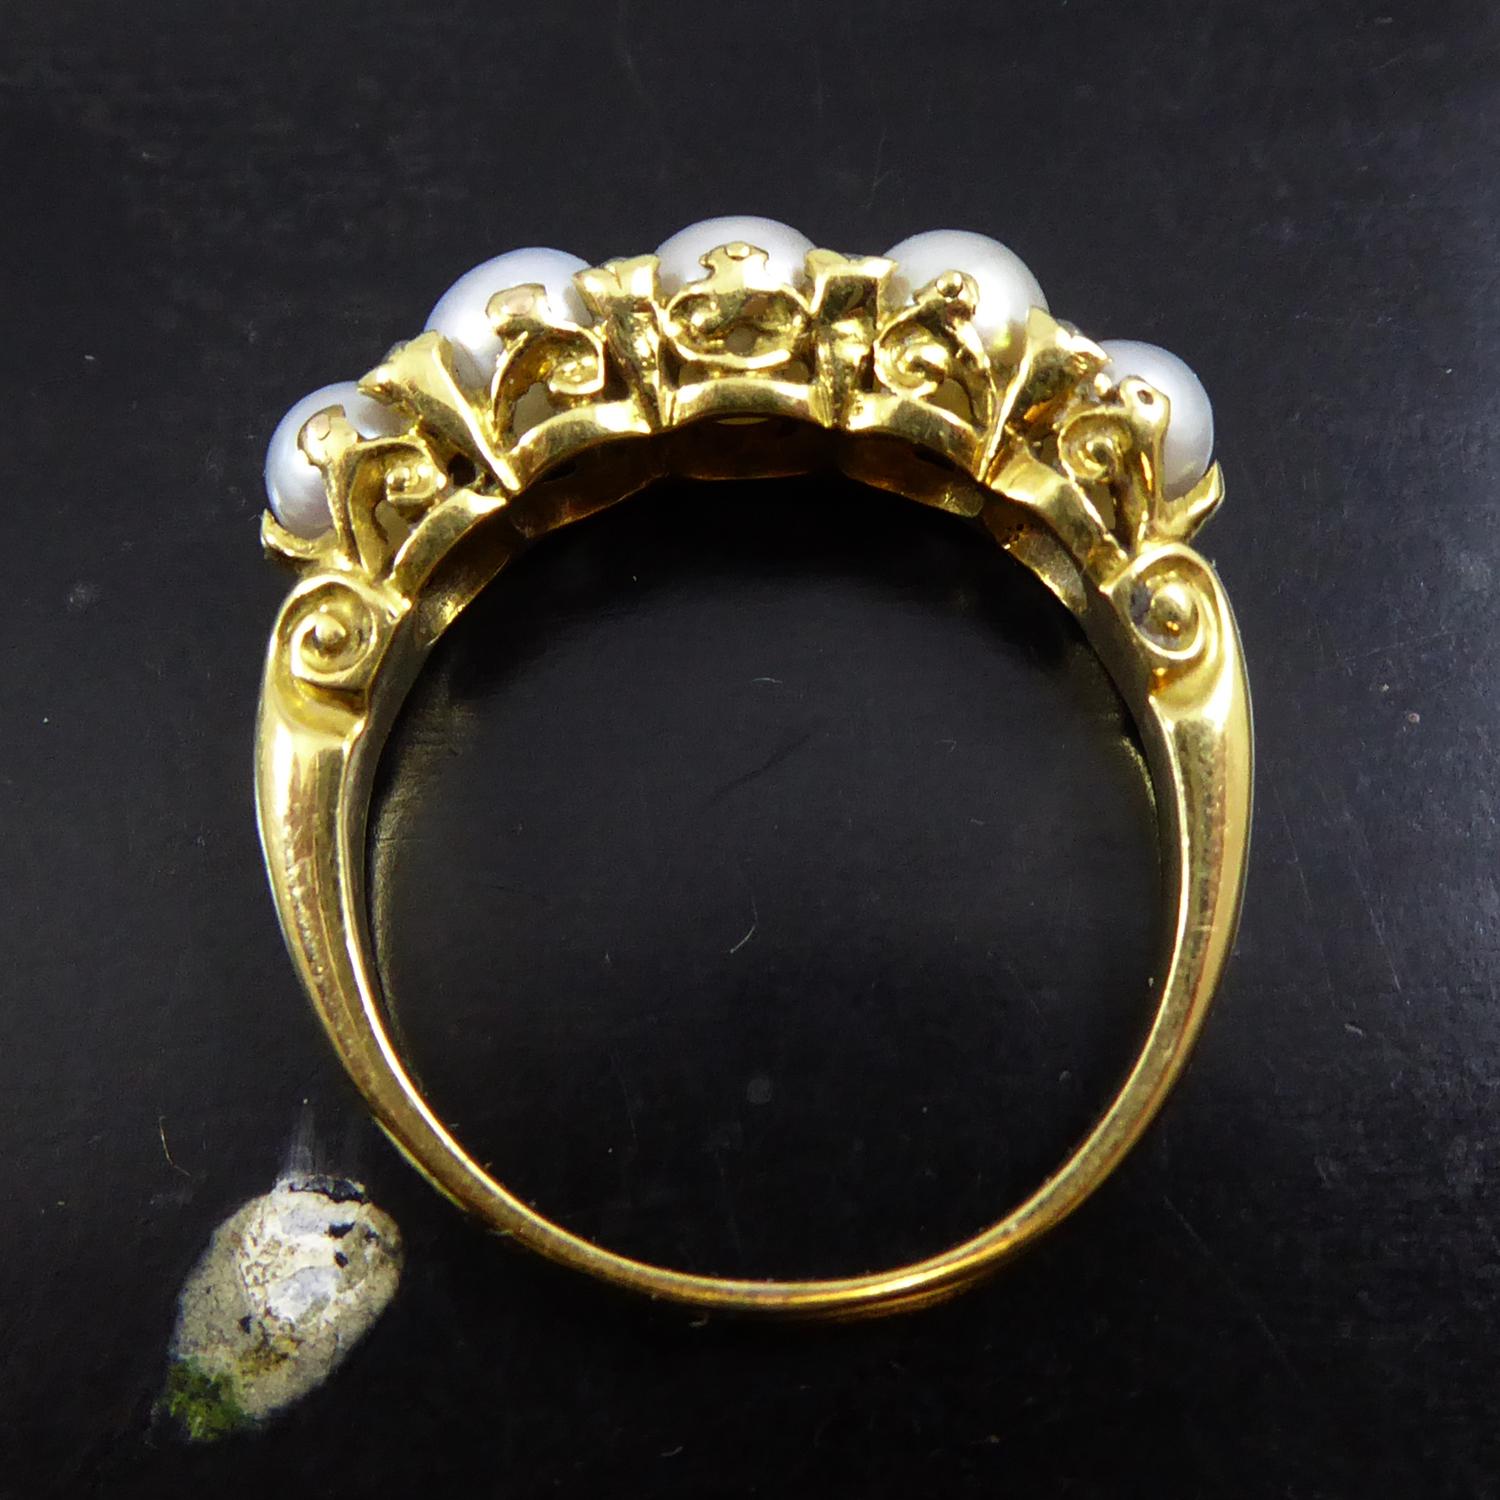 Antique Edwardian Ring Set with Diamonds and White Pearls in Yellow Gold 1